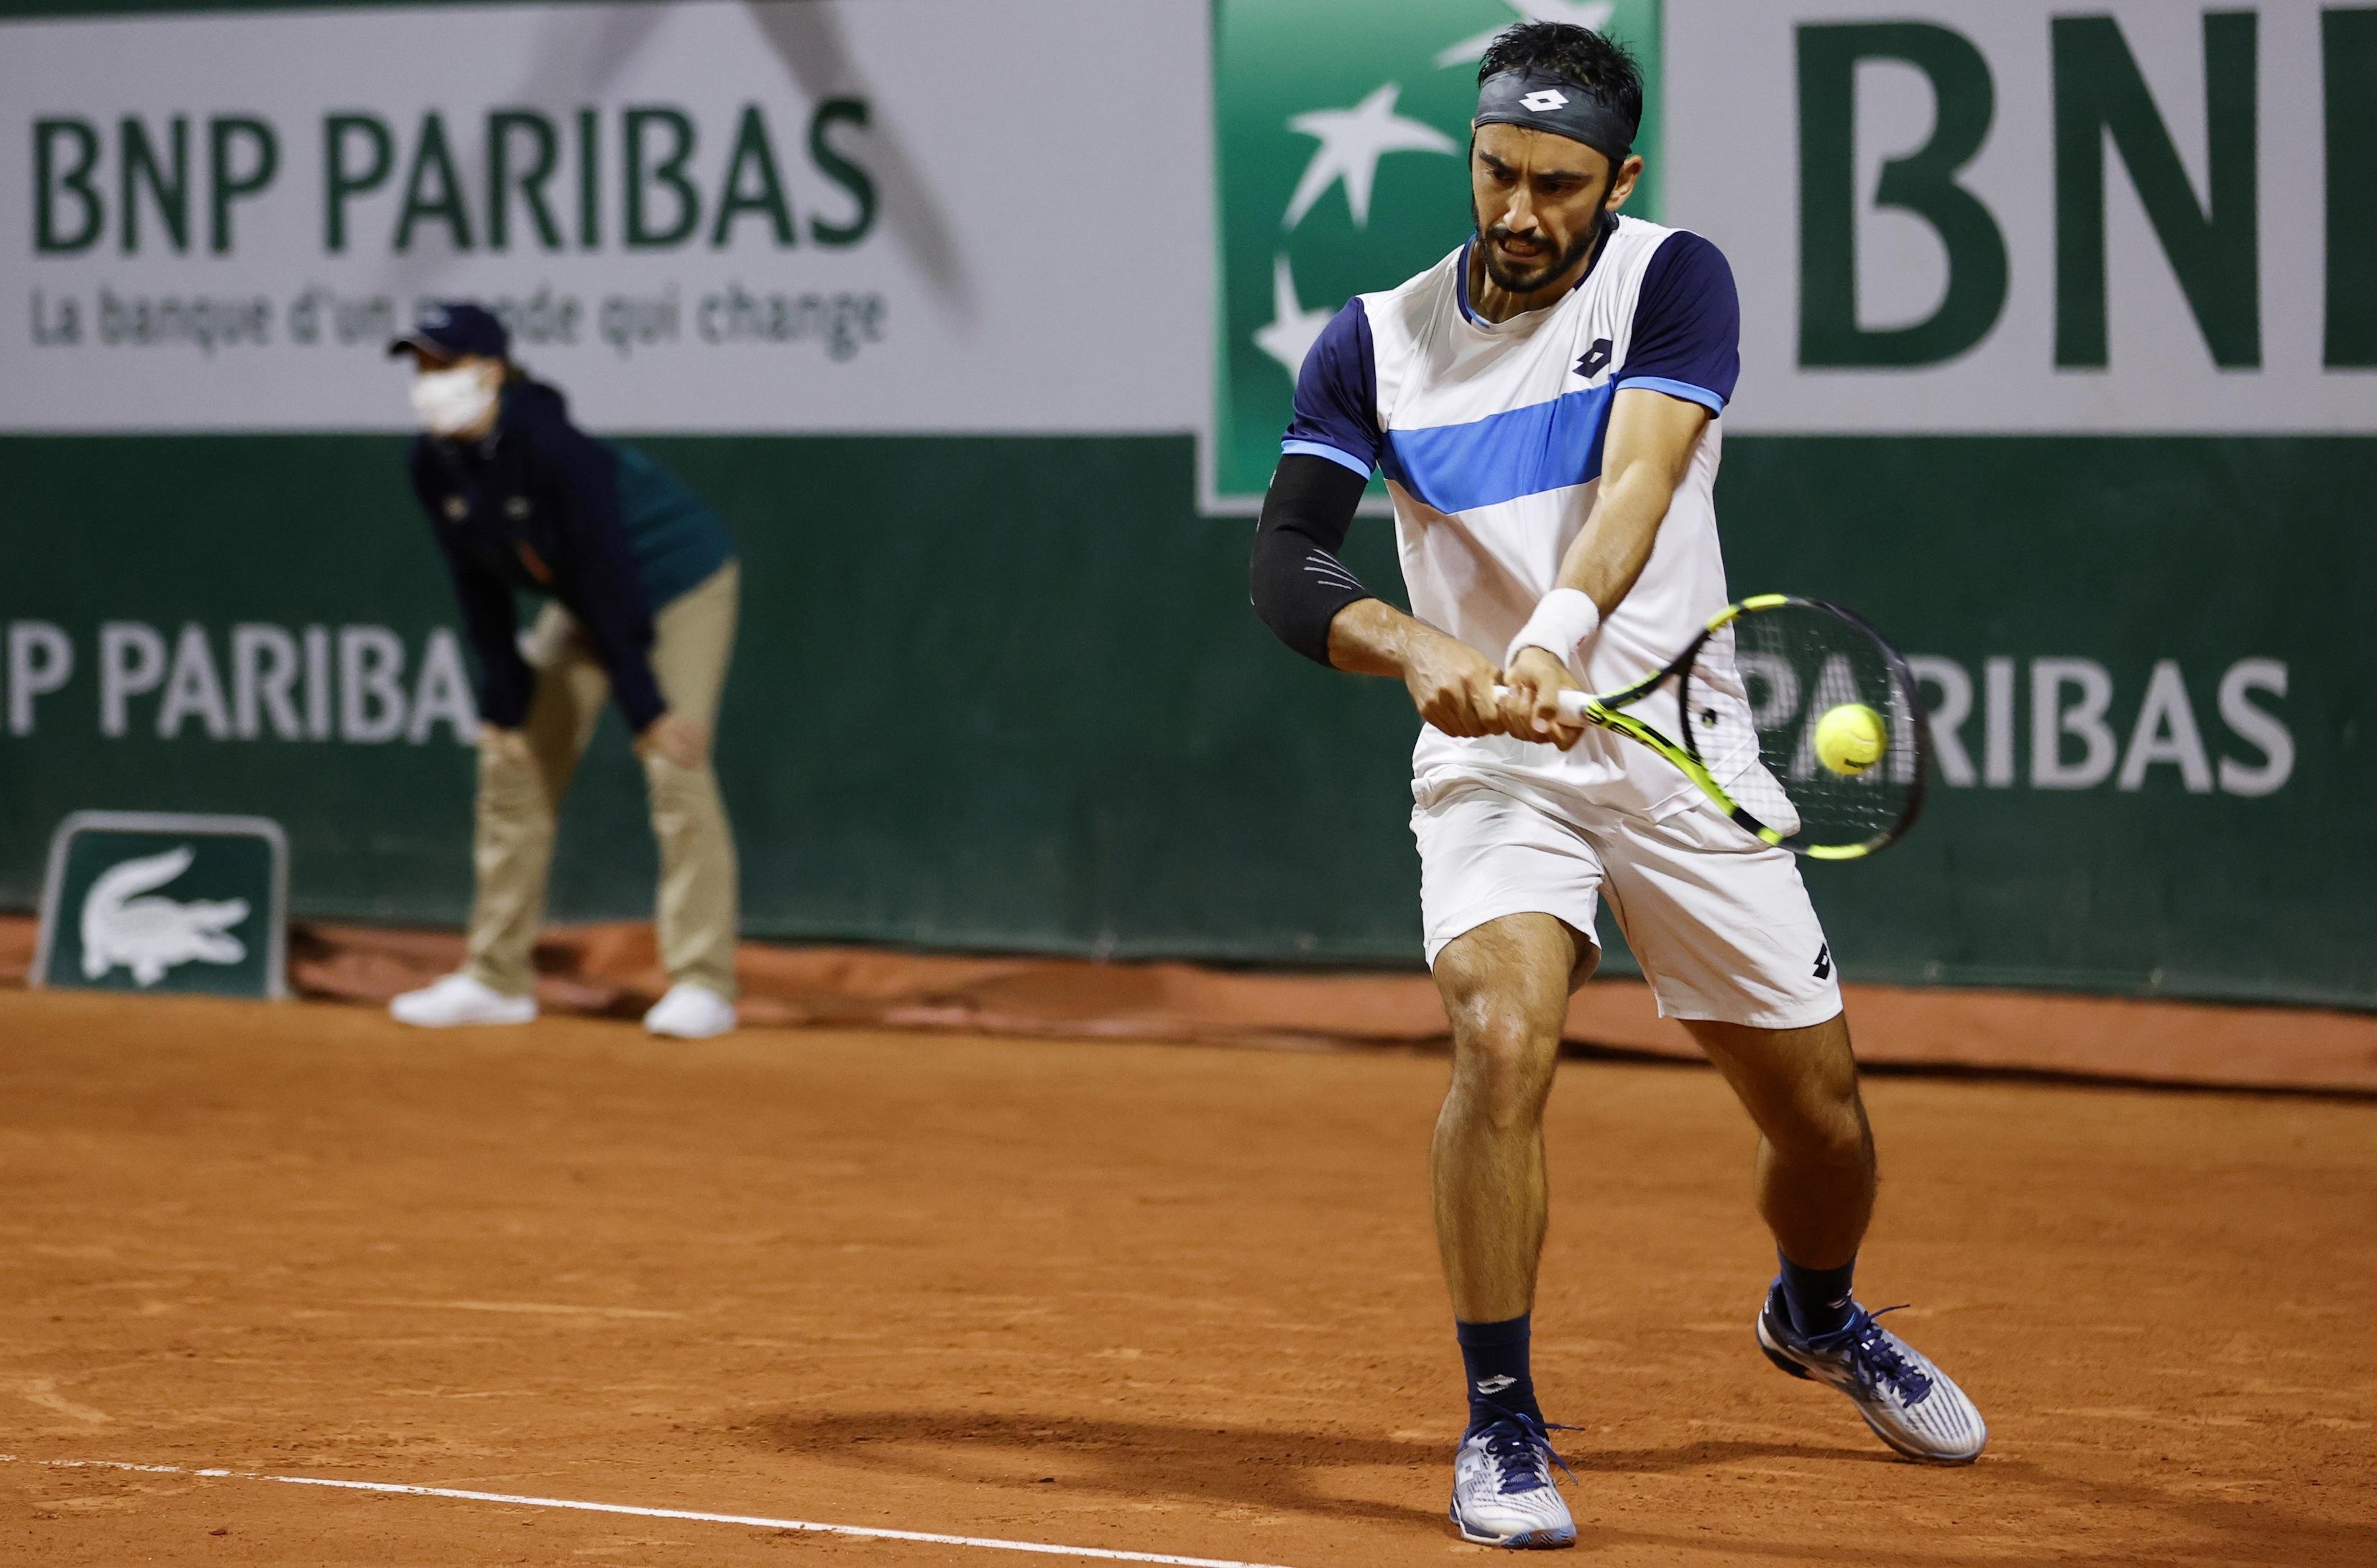 Six hours and five minutes Giustino triumphs in second longest French Open match GMA News Online